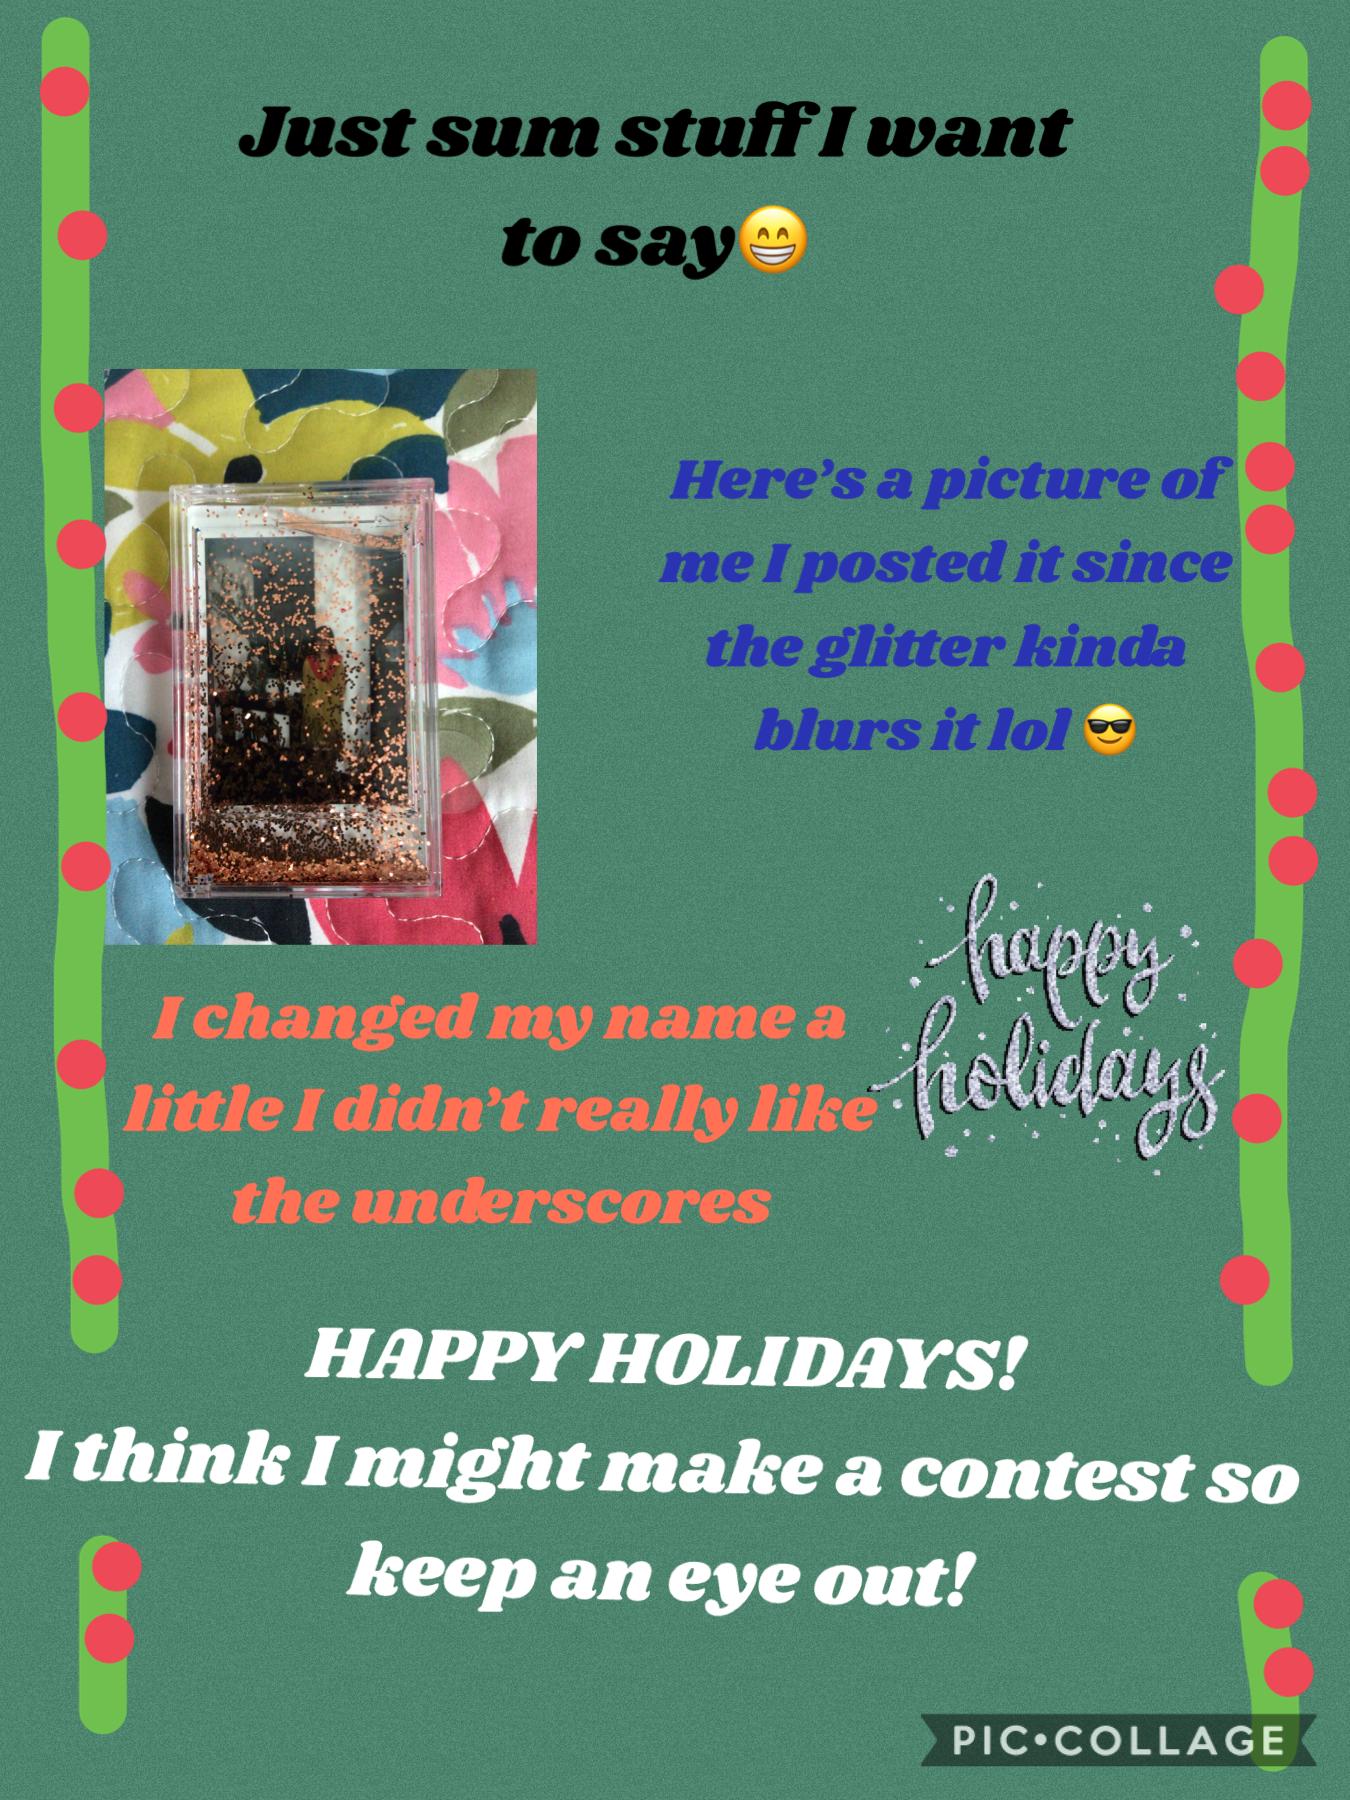 🎄 Tap 🎄
Did u know that my bday is on Jan 1!😀 I’m so excited 
Also I’ll post contest info 🔜 
Have a great holiday season!🎄😁